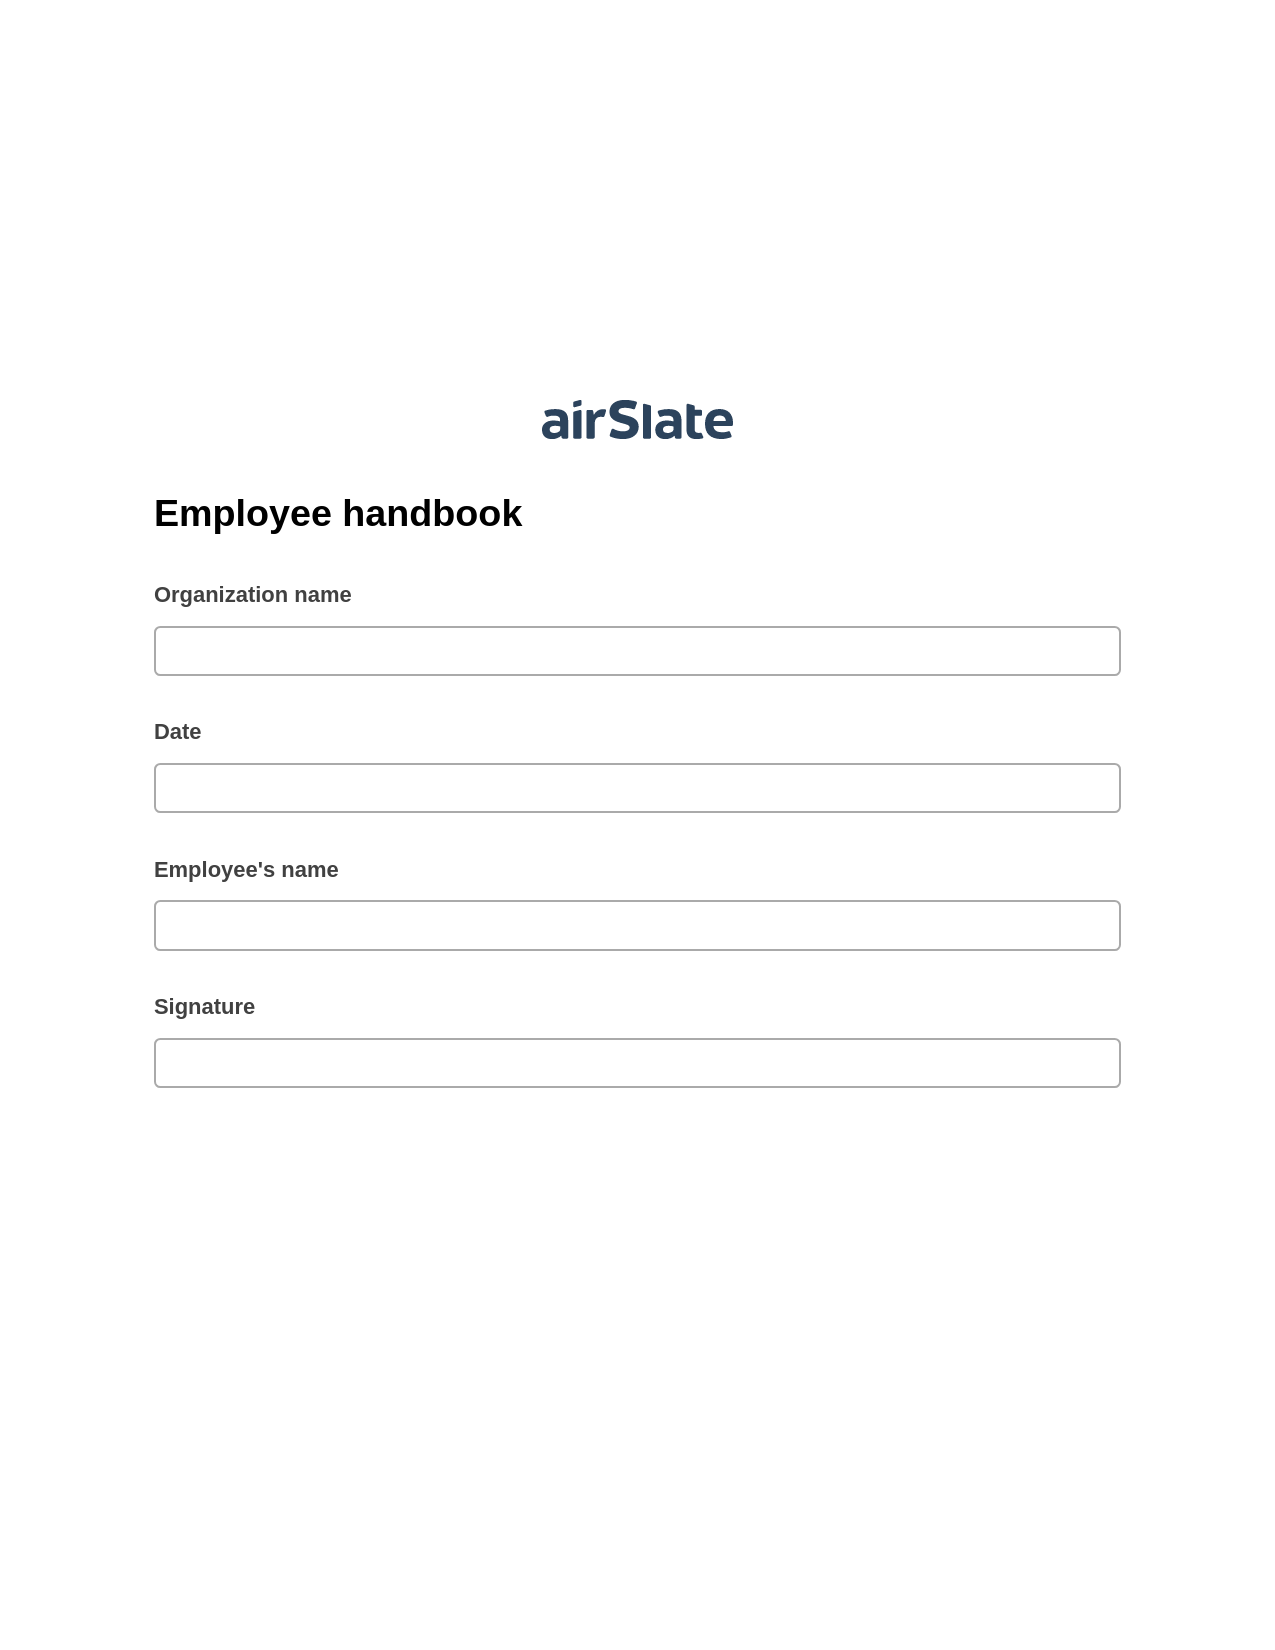 Employee handbook Pre-fill Dropdowns from CSV File Bot, Set Signature Type Bot, Export to Salesforce Bot